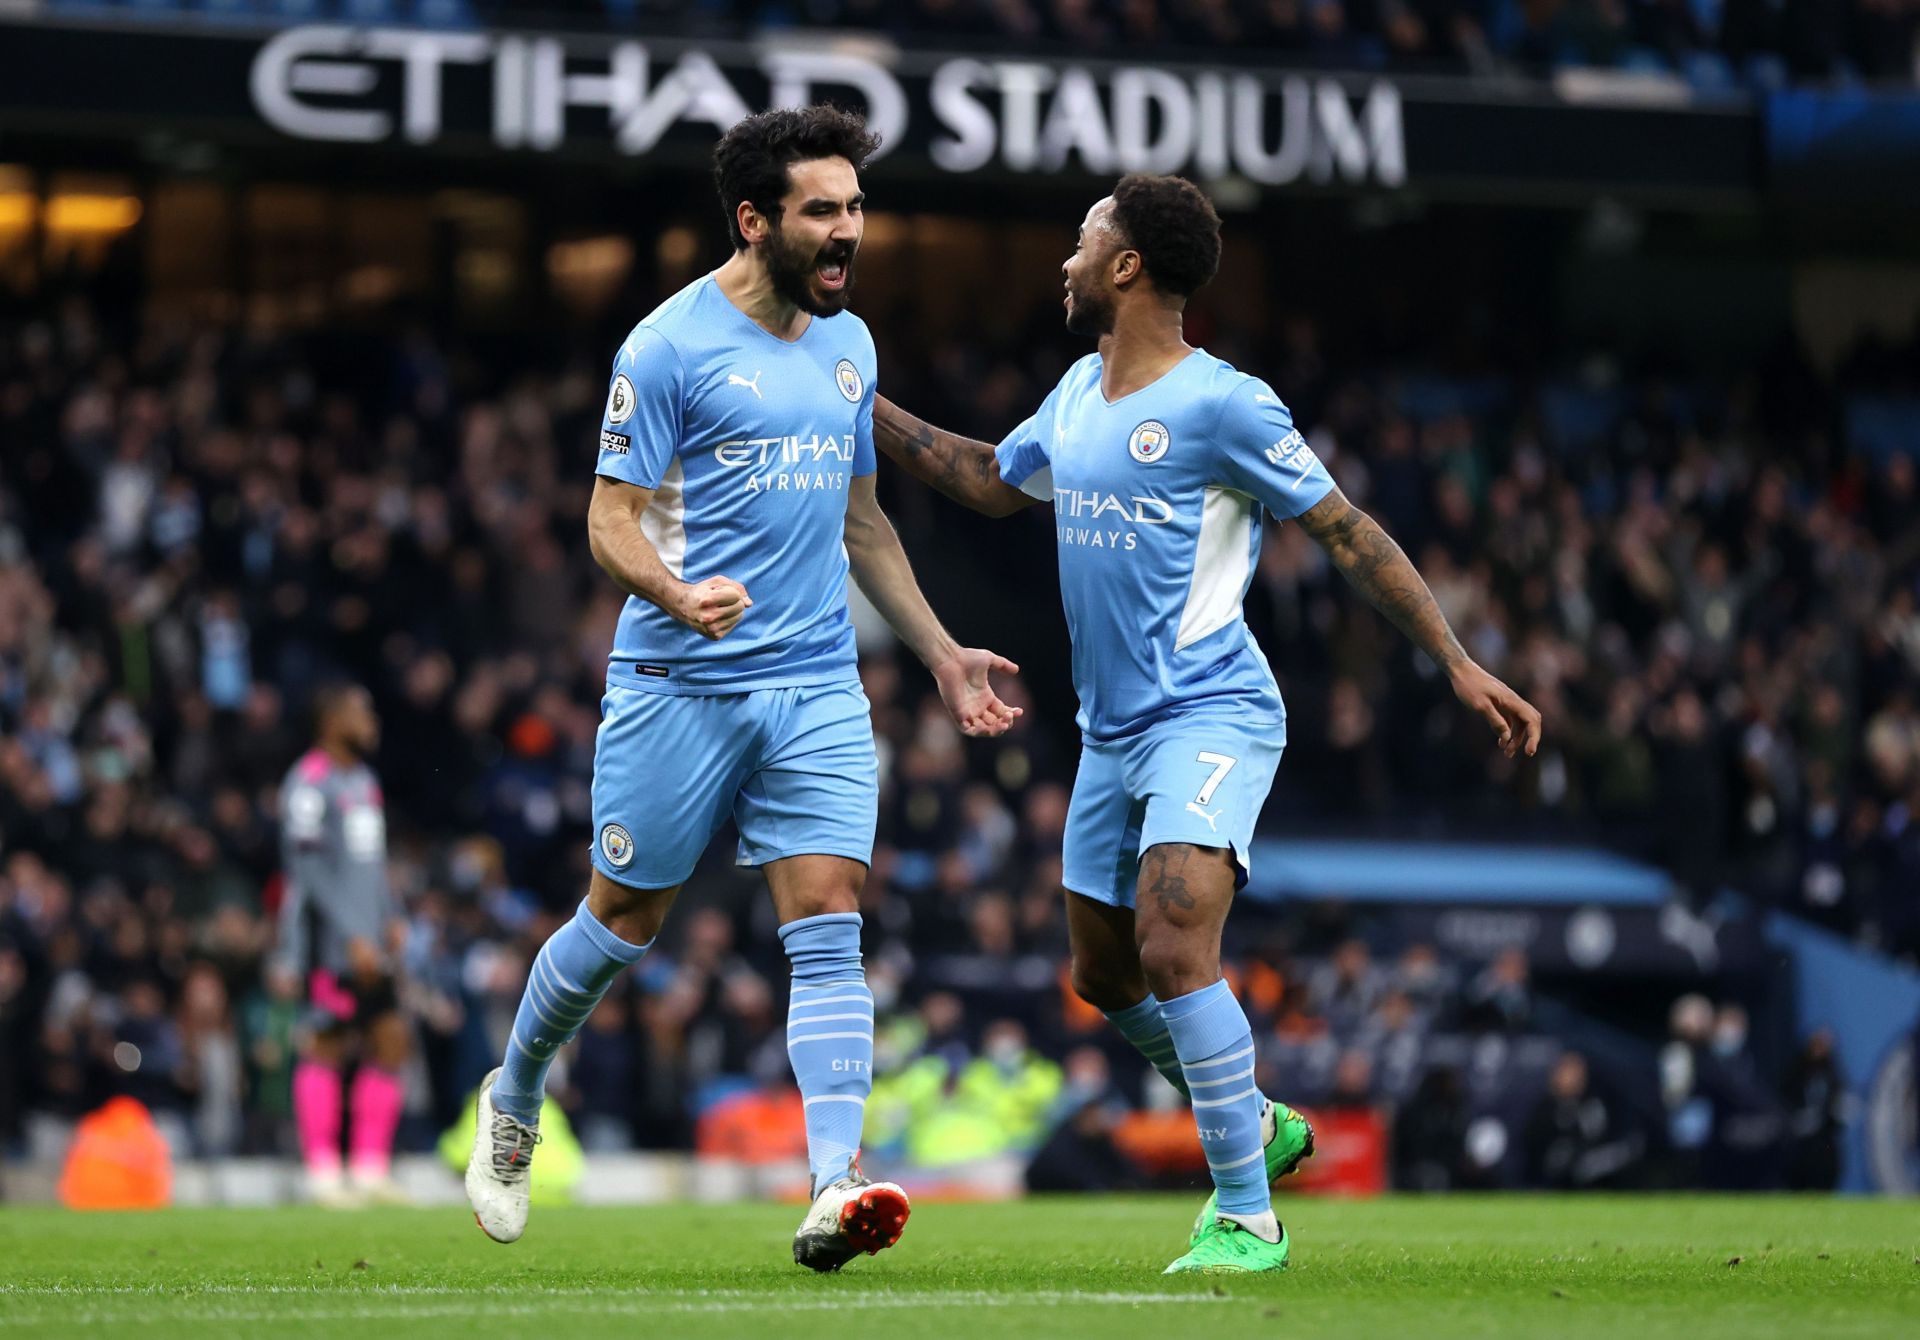 Manchester City overwhelmed Leicester City in their Premier League fixture on Sunday